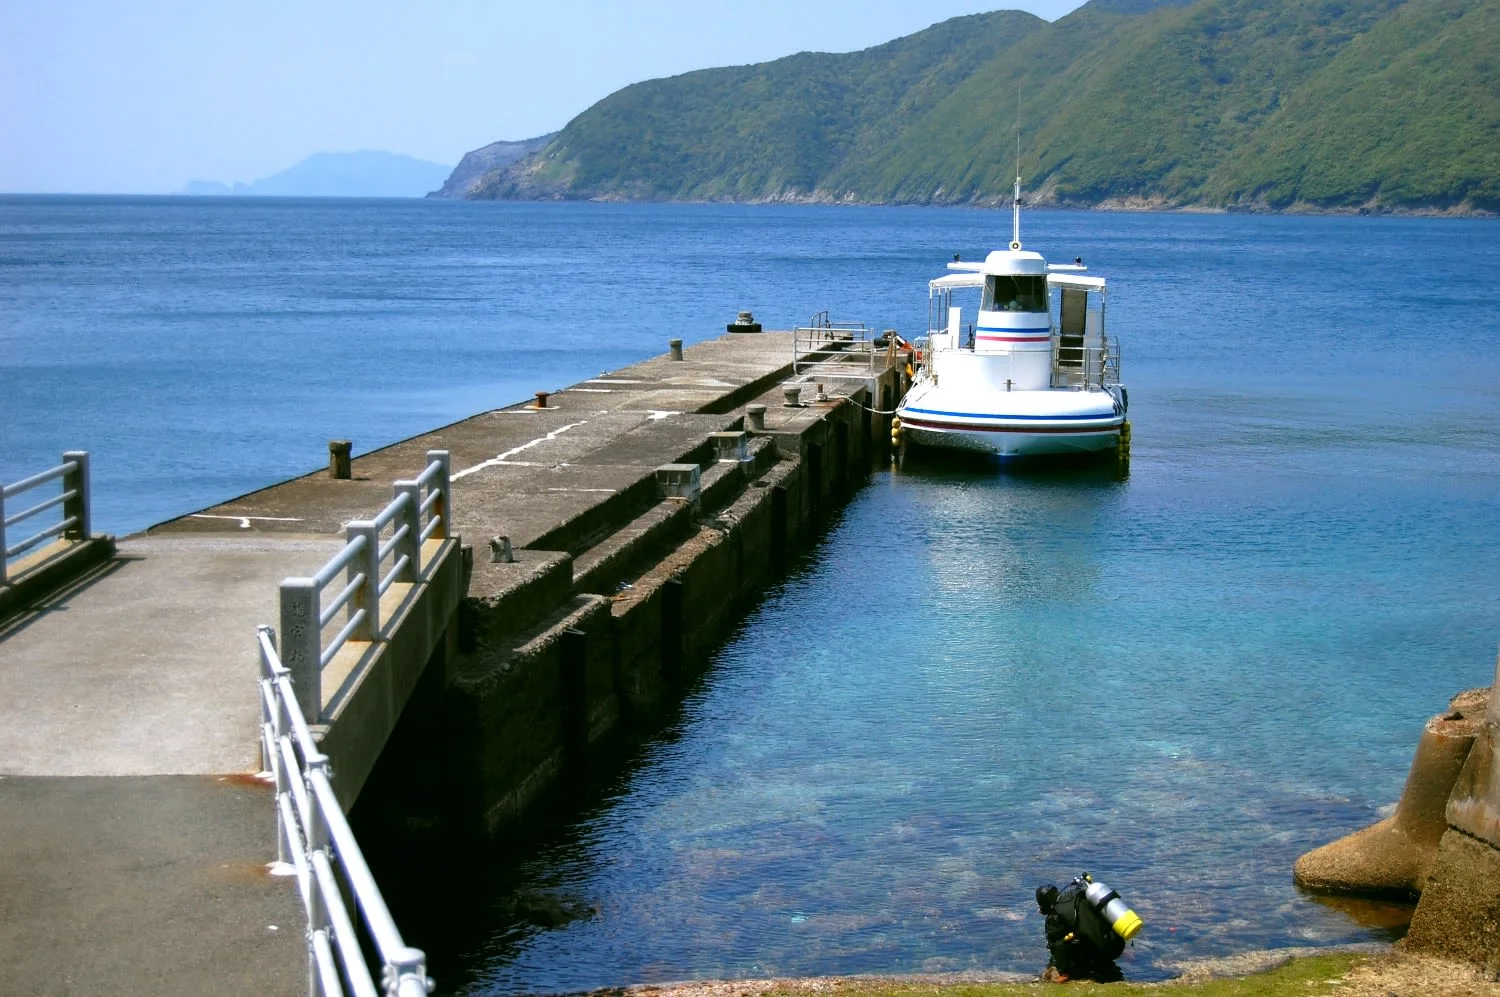 Sightseeing Tour on a Semi-Submersible Boat in Ainan, Ehime